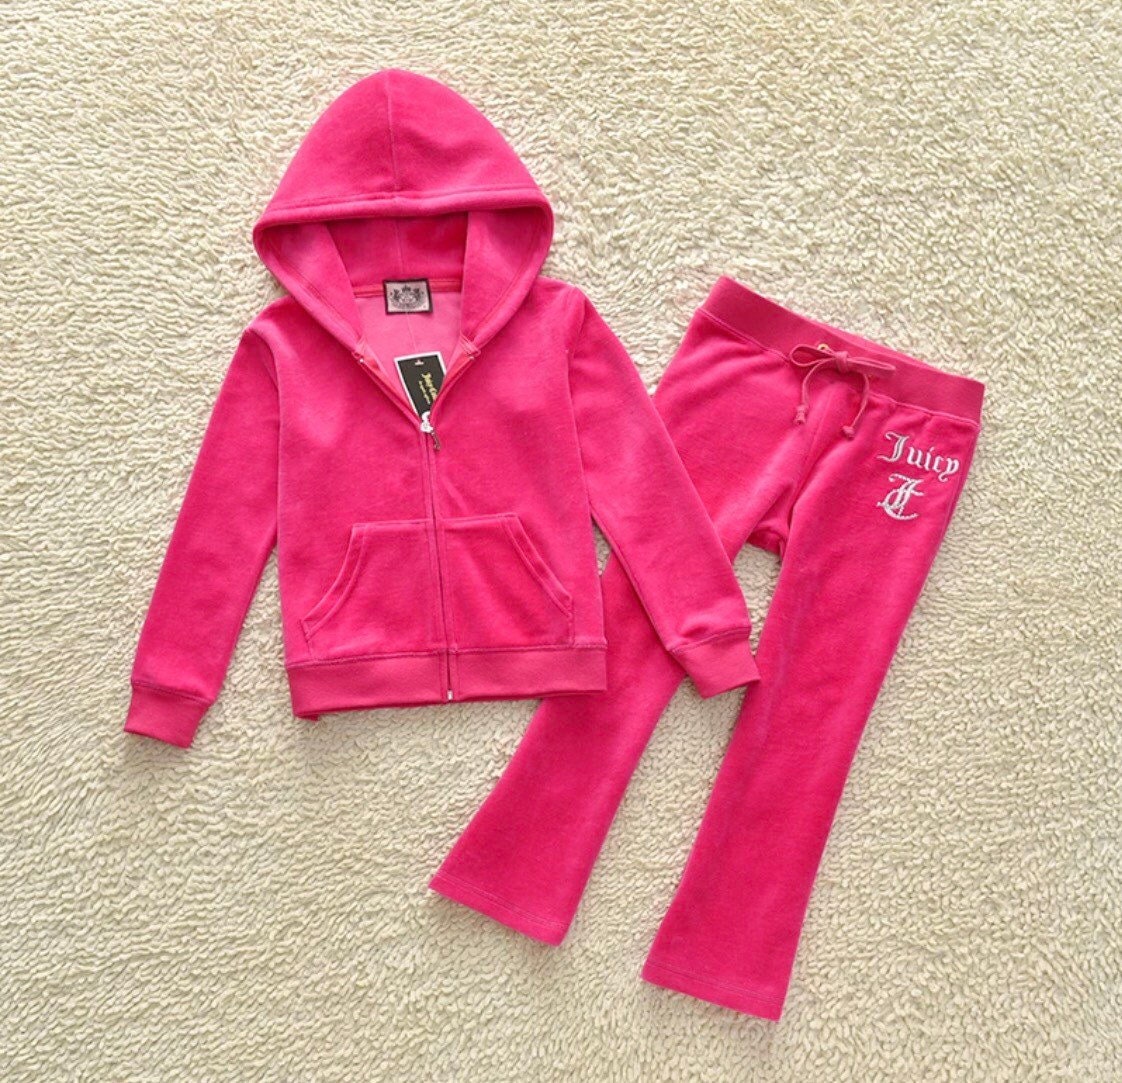 Kids Juicy Couture Tracksuit | Etsy